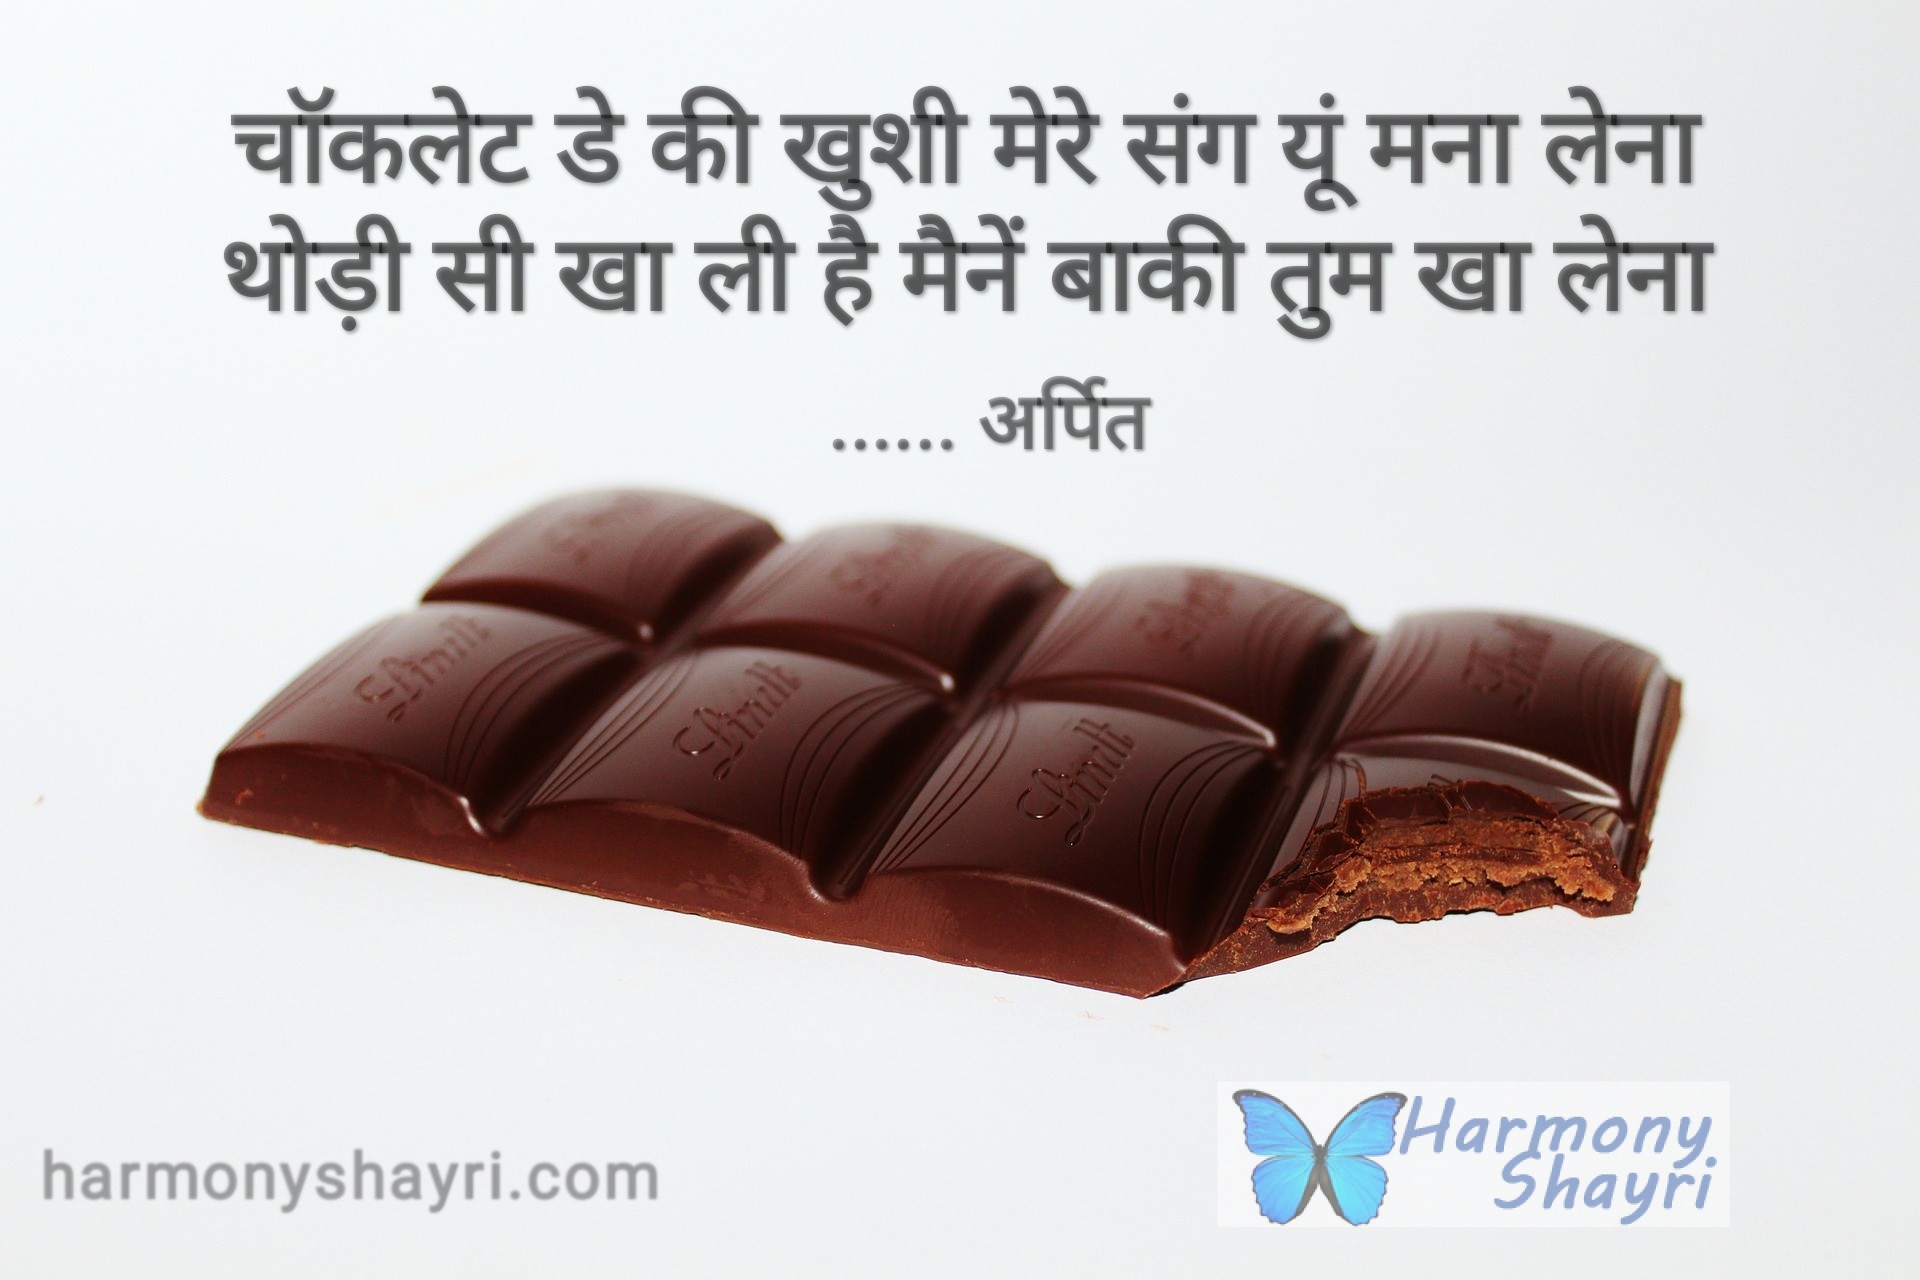 Happy Chocolate Day – Arpit